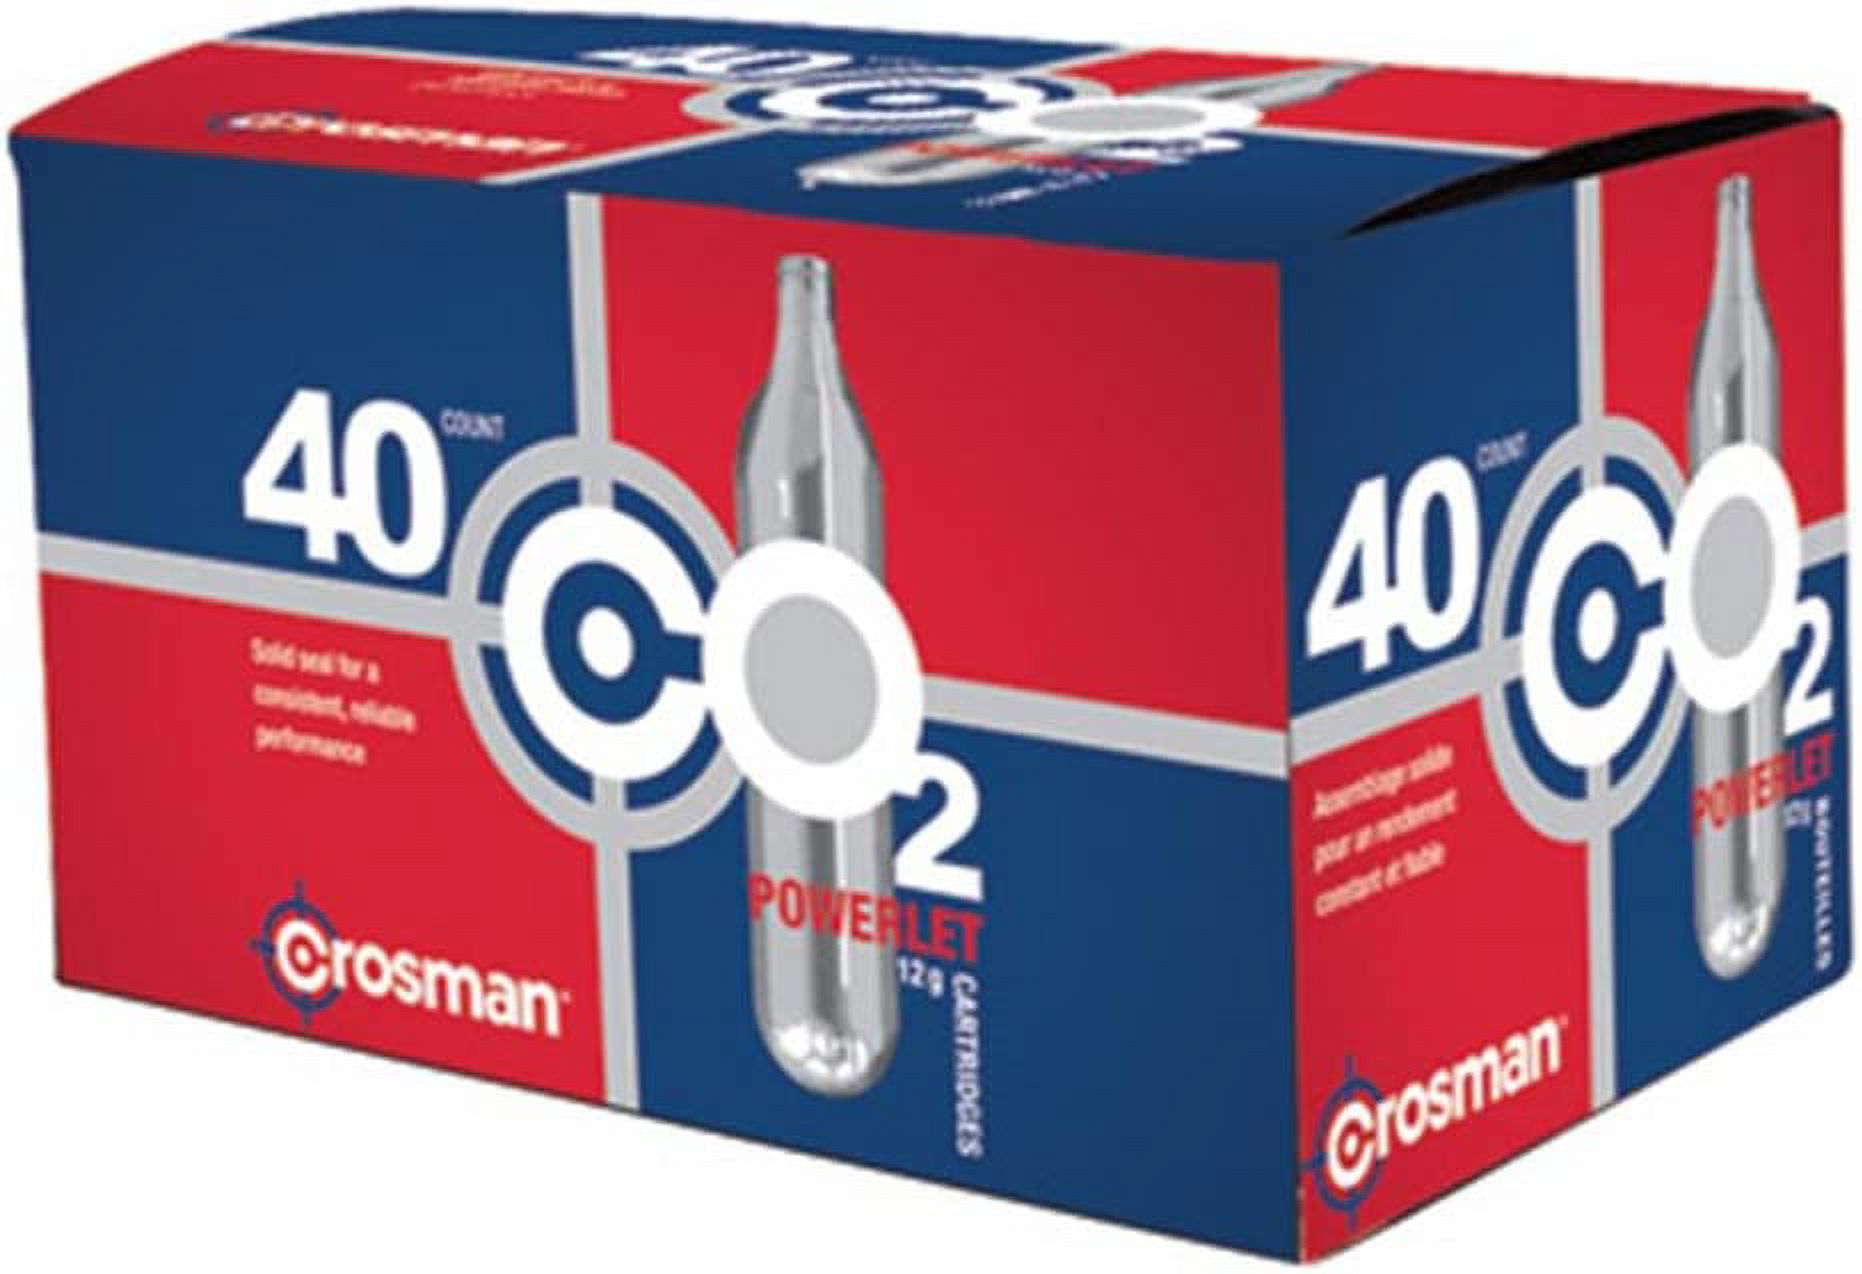 Crosman 12 Gram Co2 Powerlets, 40ct, for Use with Paintball, Air Soft or Air Rifles - image 1 of 4